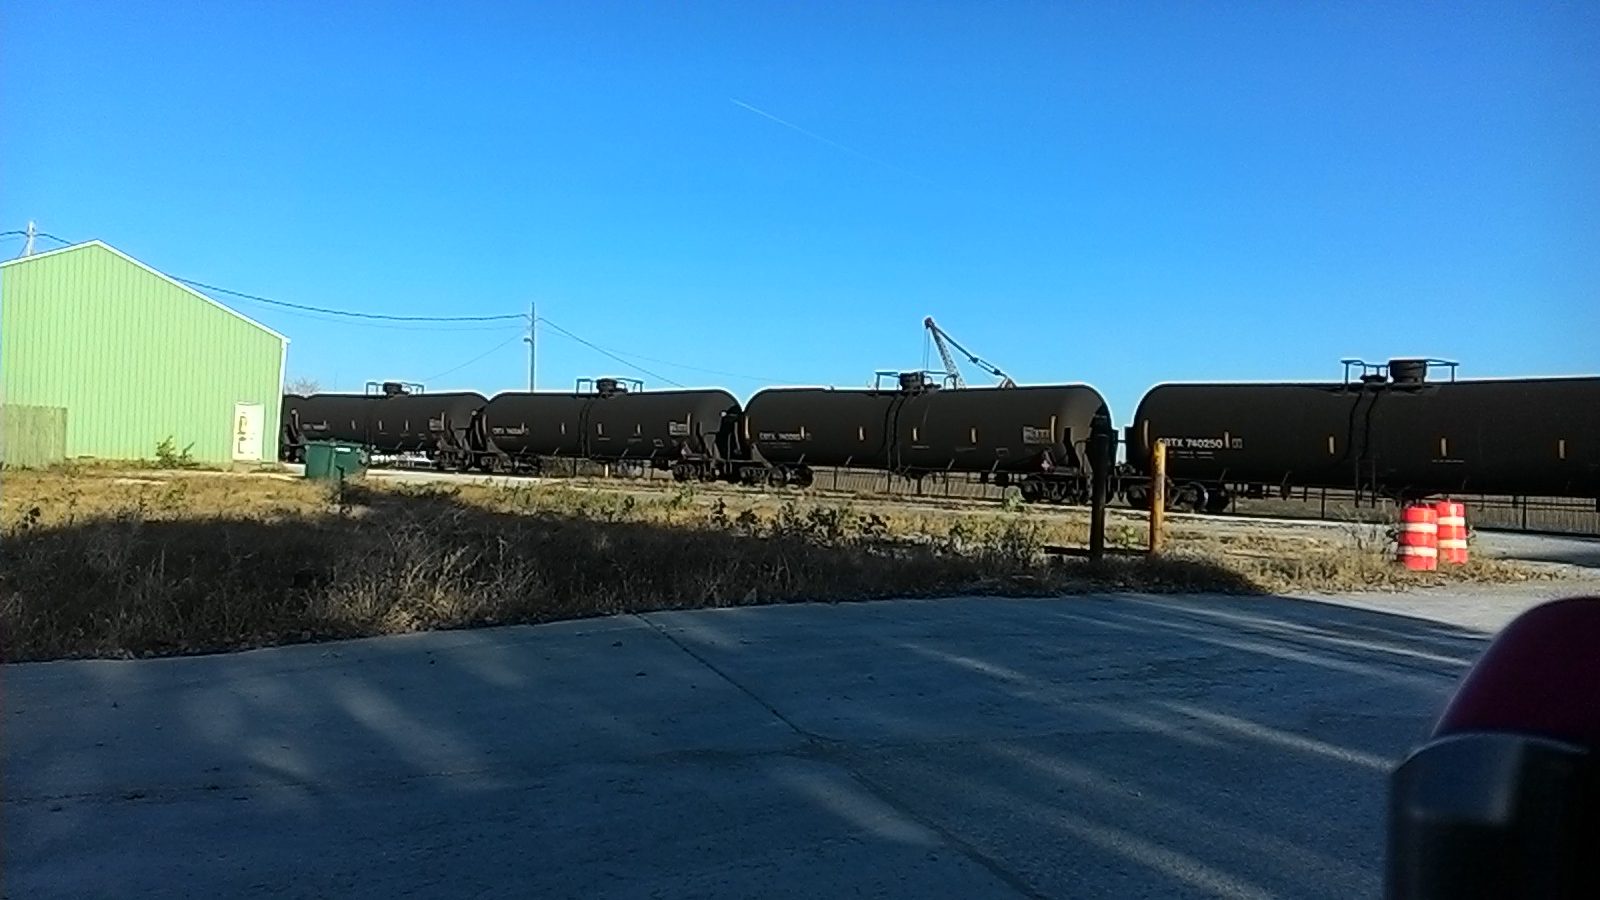 This picture was taken a couple weeks ago along River Drive near downtown Davenport. The train is heading south. There were at least fifty such rail tanker cars in this particular train. Barges laden with crude also make the trip down-river to the Gulf. Barges and trains with crude traveling on or adjacent to waterways. Modern pipelines have more robust safety provisions. 